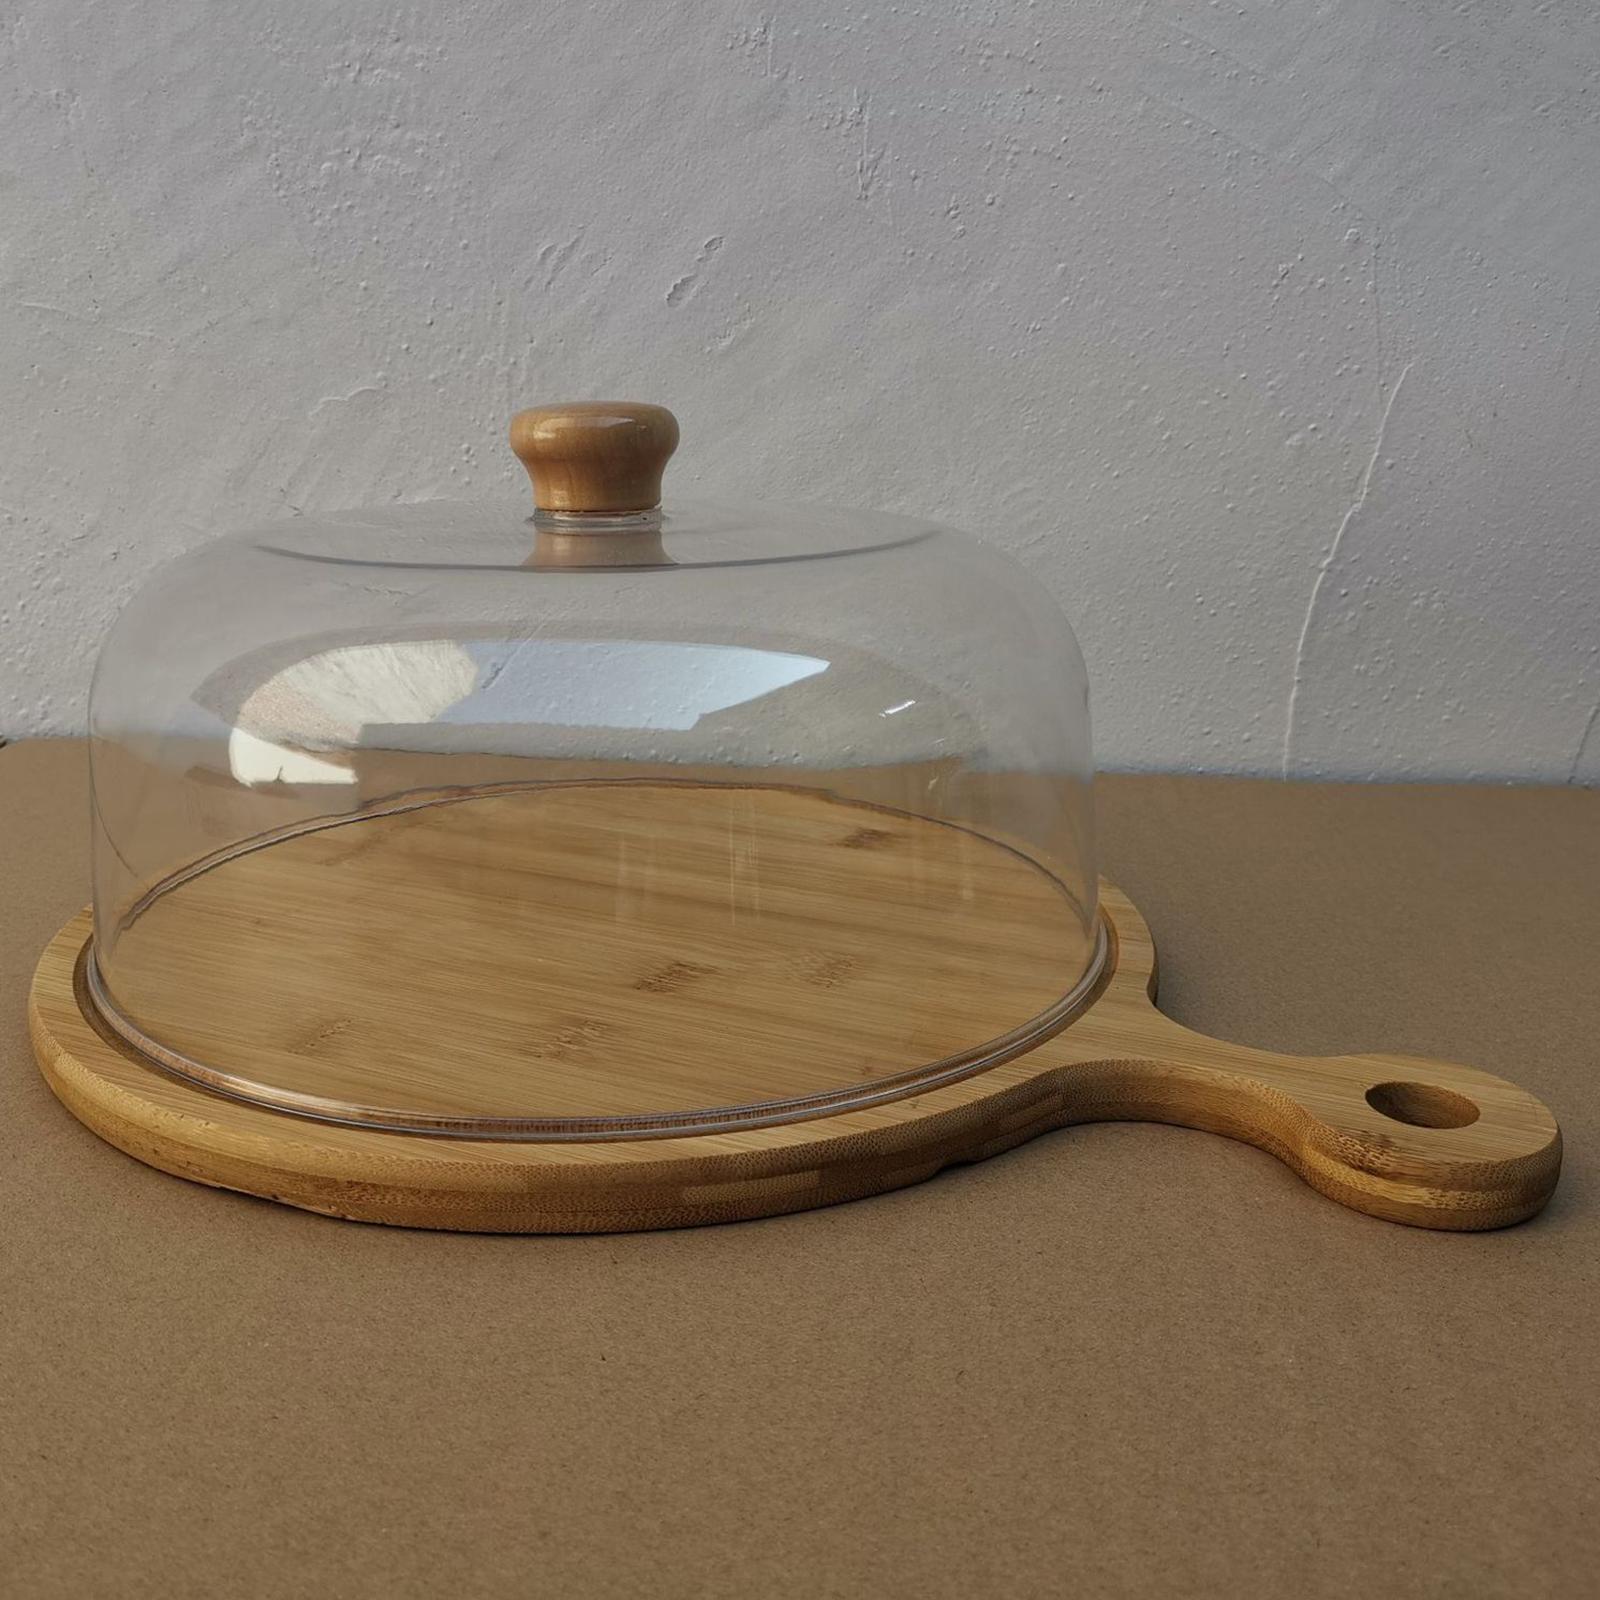 Wooden Pizza Peel Paddle Kitchen Serving Platter Cheese Plate